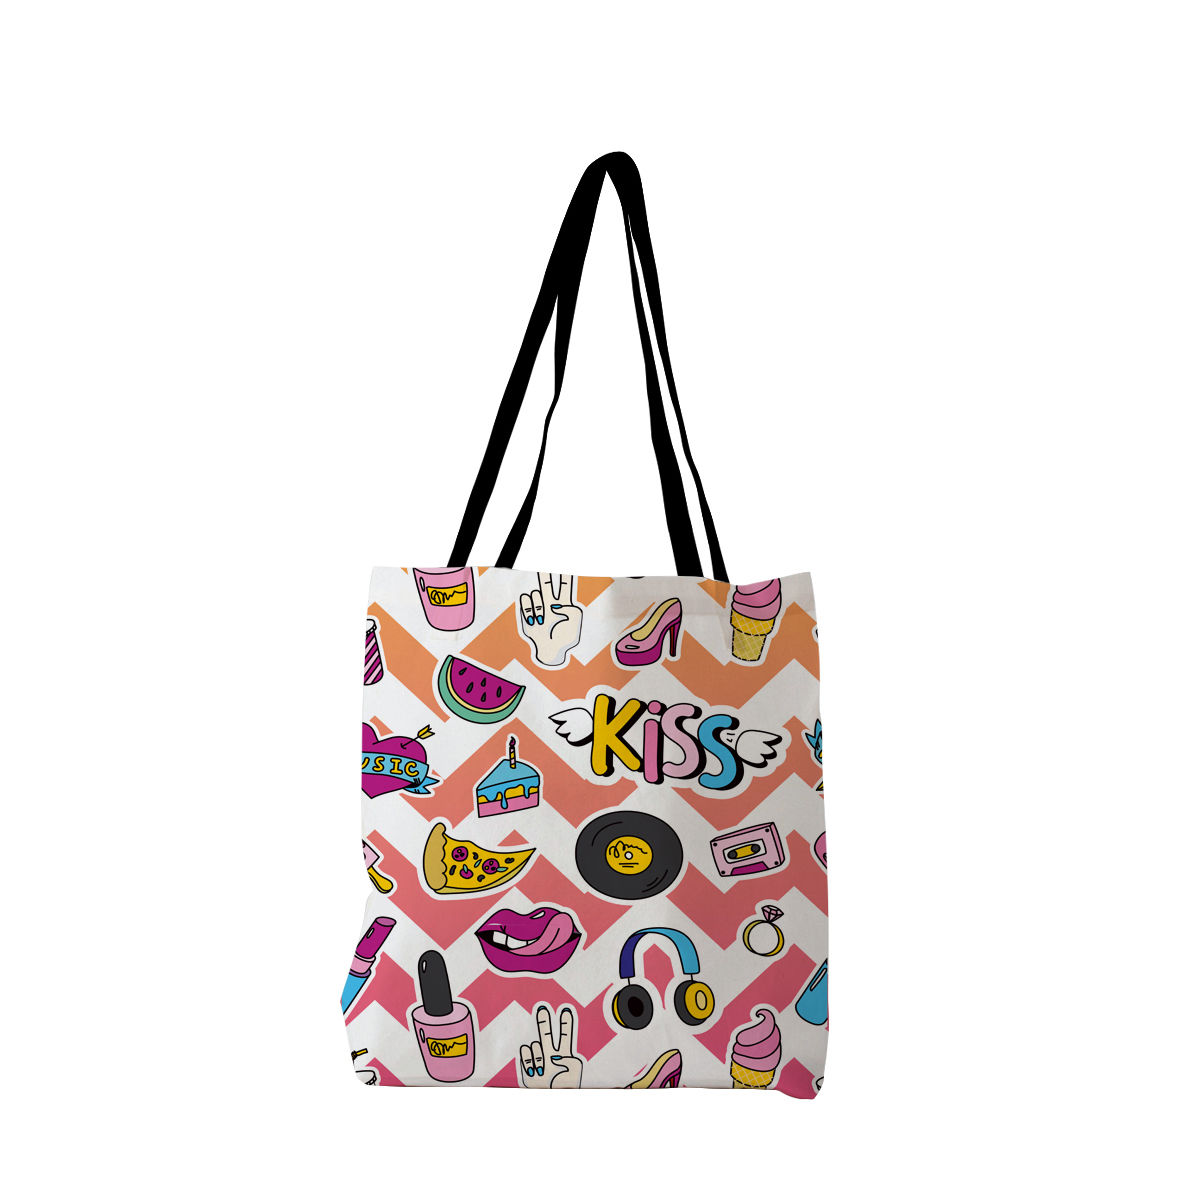 Quirky totes MINI WESST Multi Casual Graphic Tote Bag – Miniwesst bags